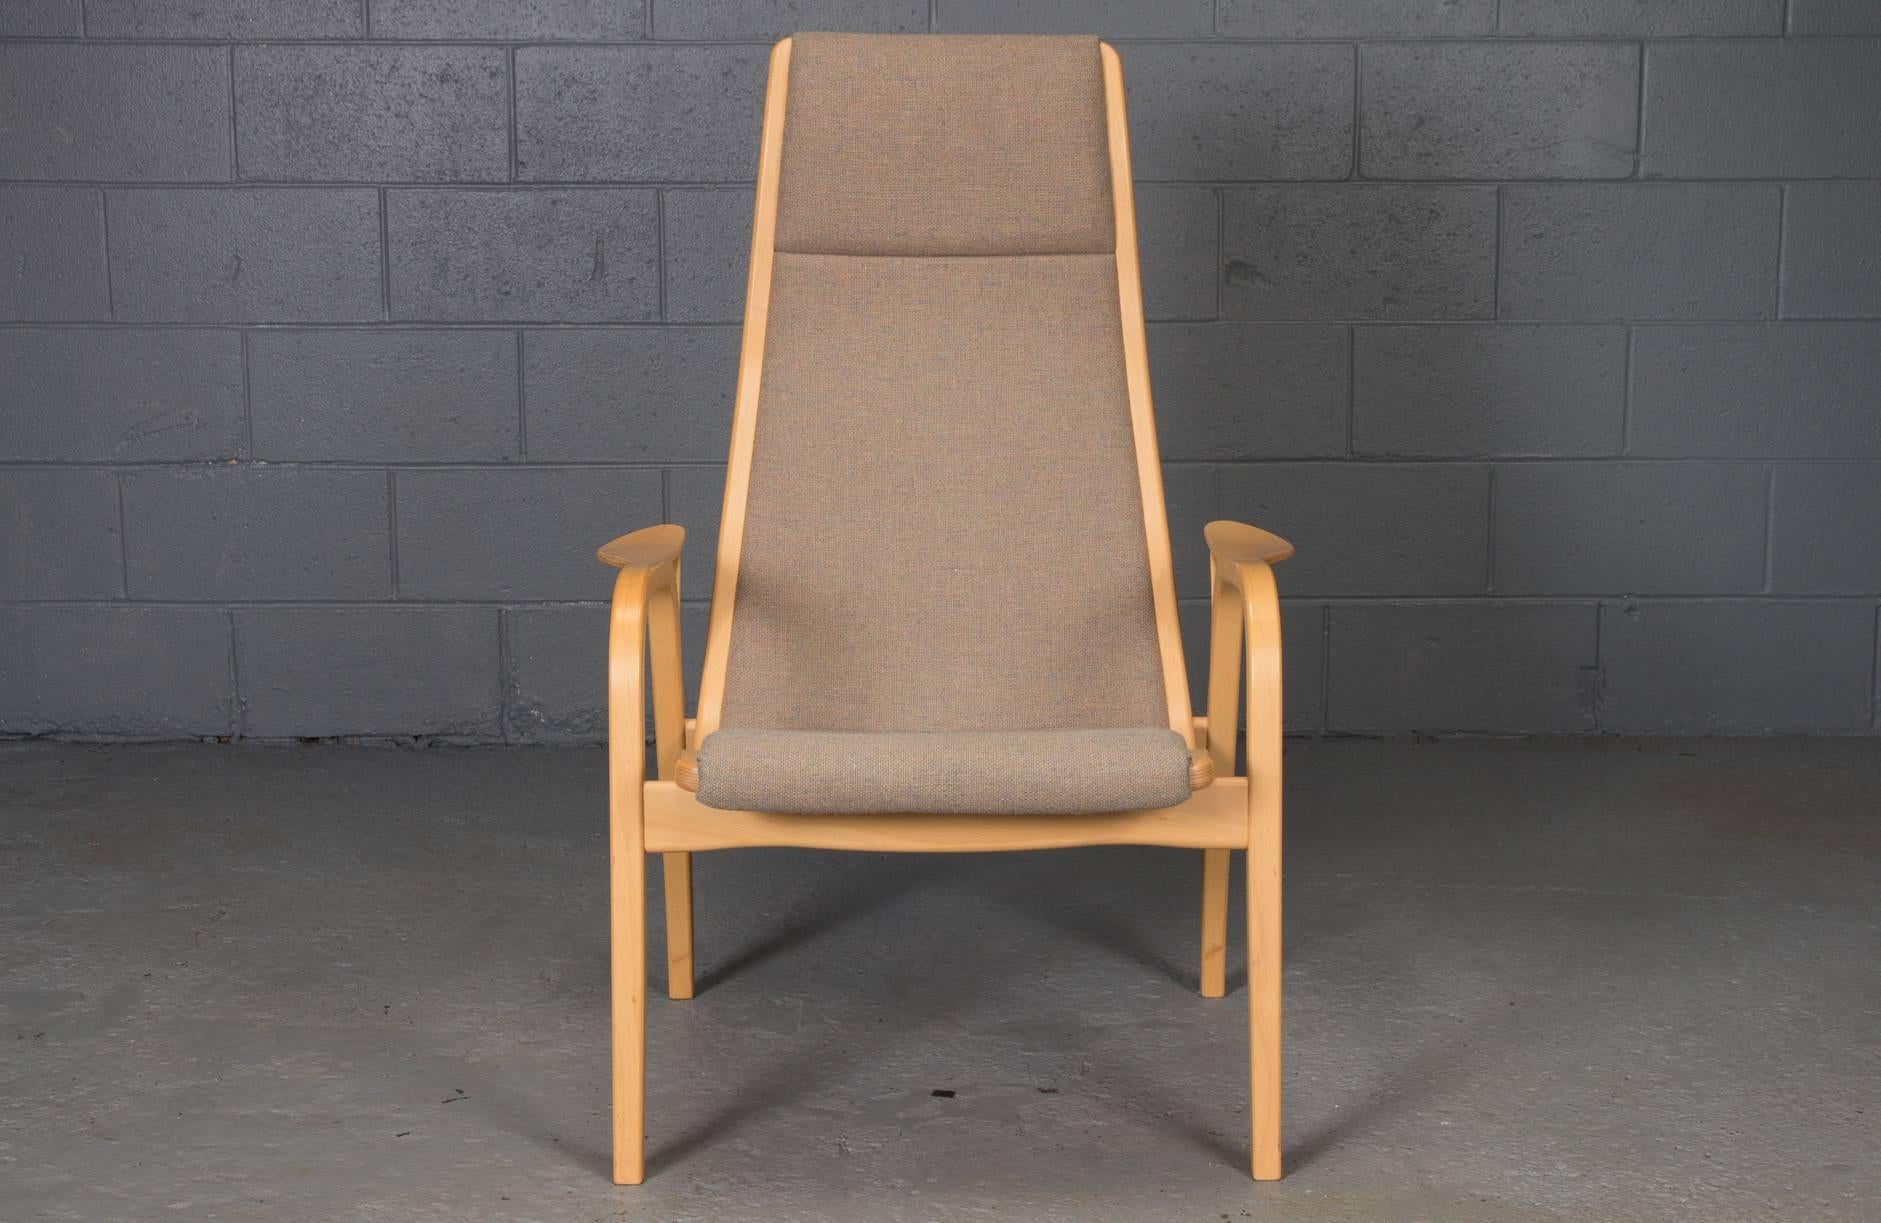 Lamino lounge chair in beech by Yngve Ekström, manufactured by Swedese. Designed in 1952.